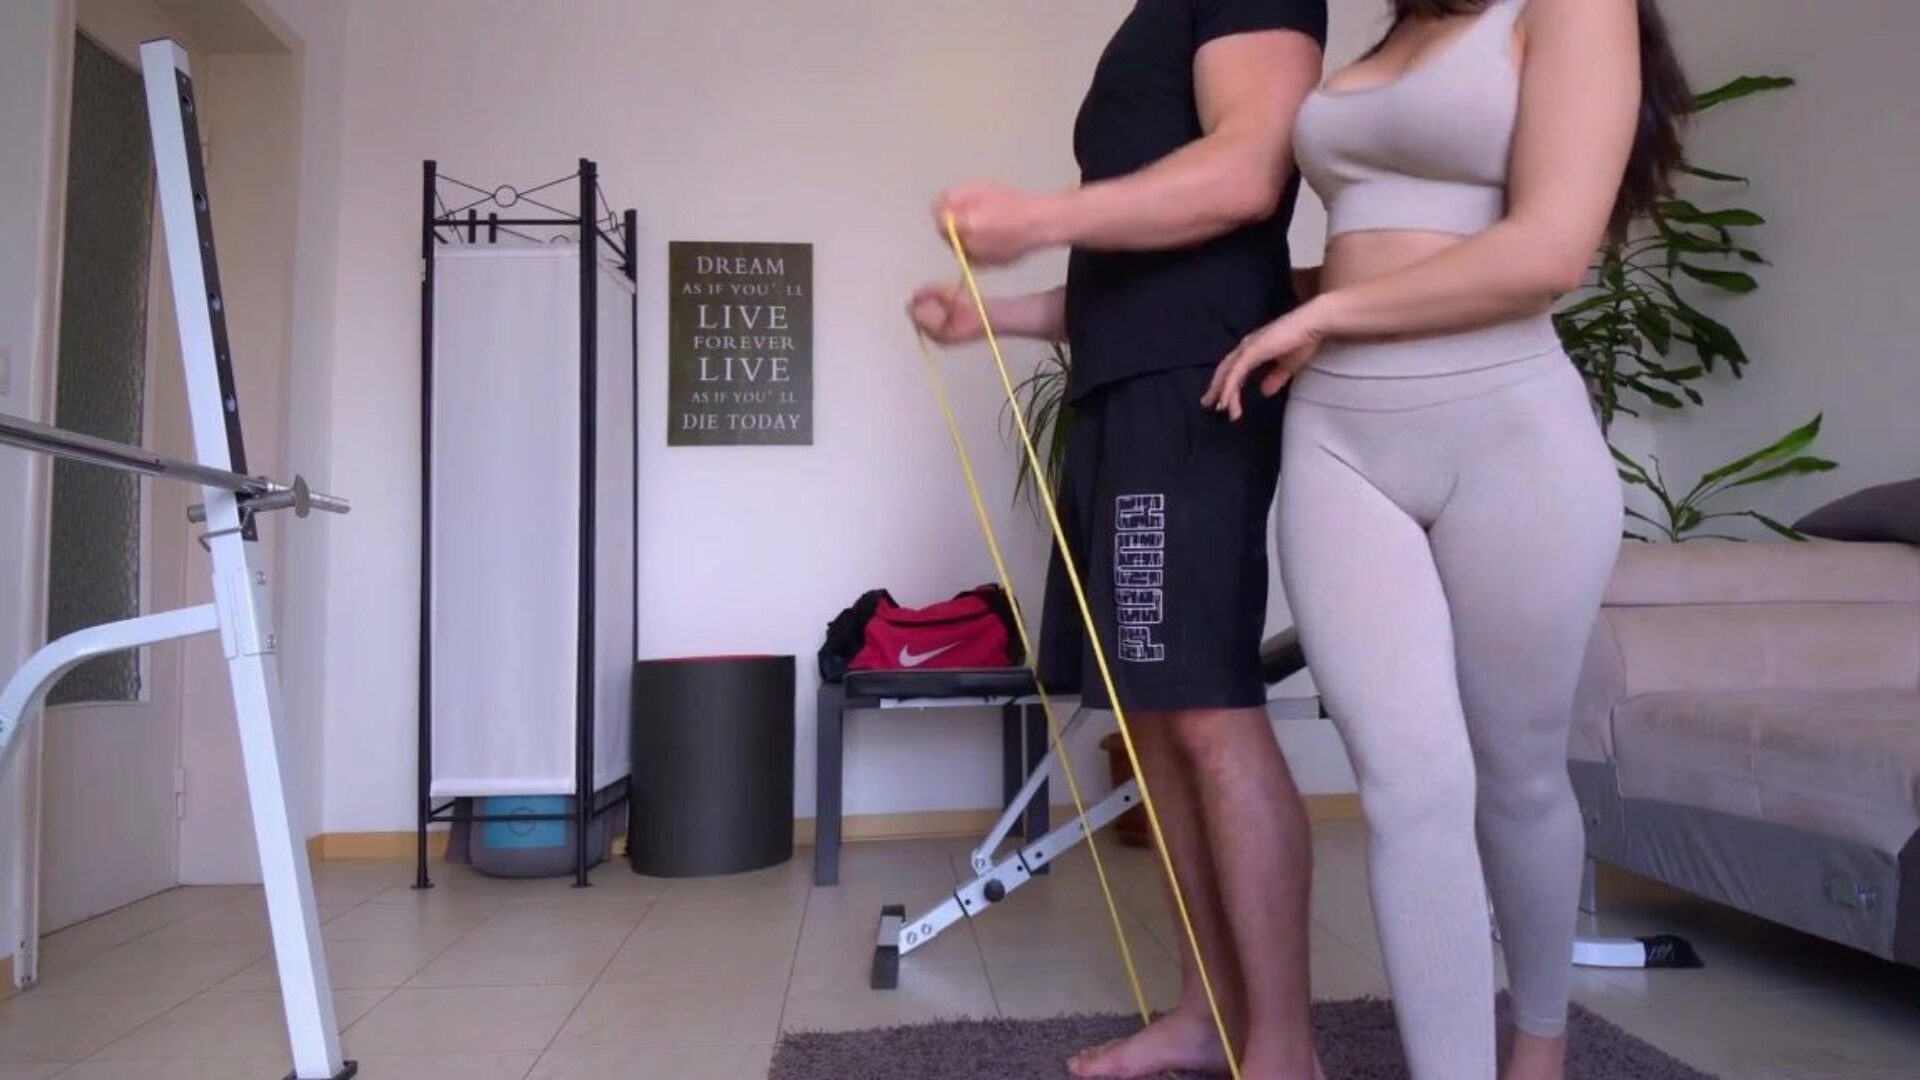 OMG this guy made me drizzle on myself ! - most good snatch teaching ever